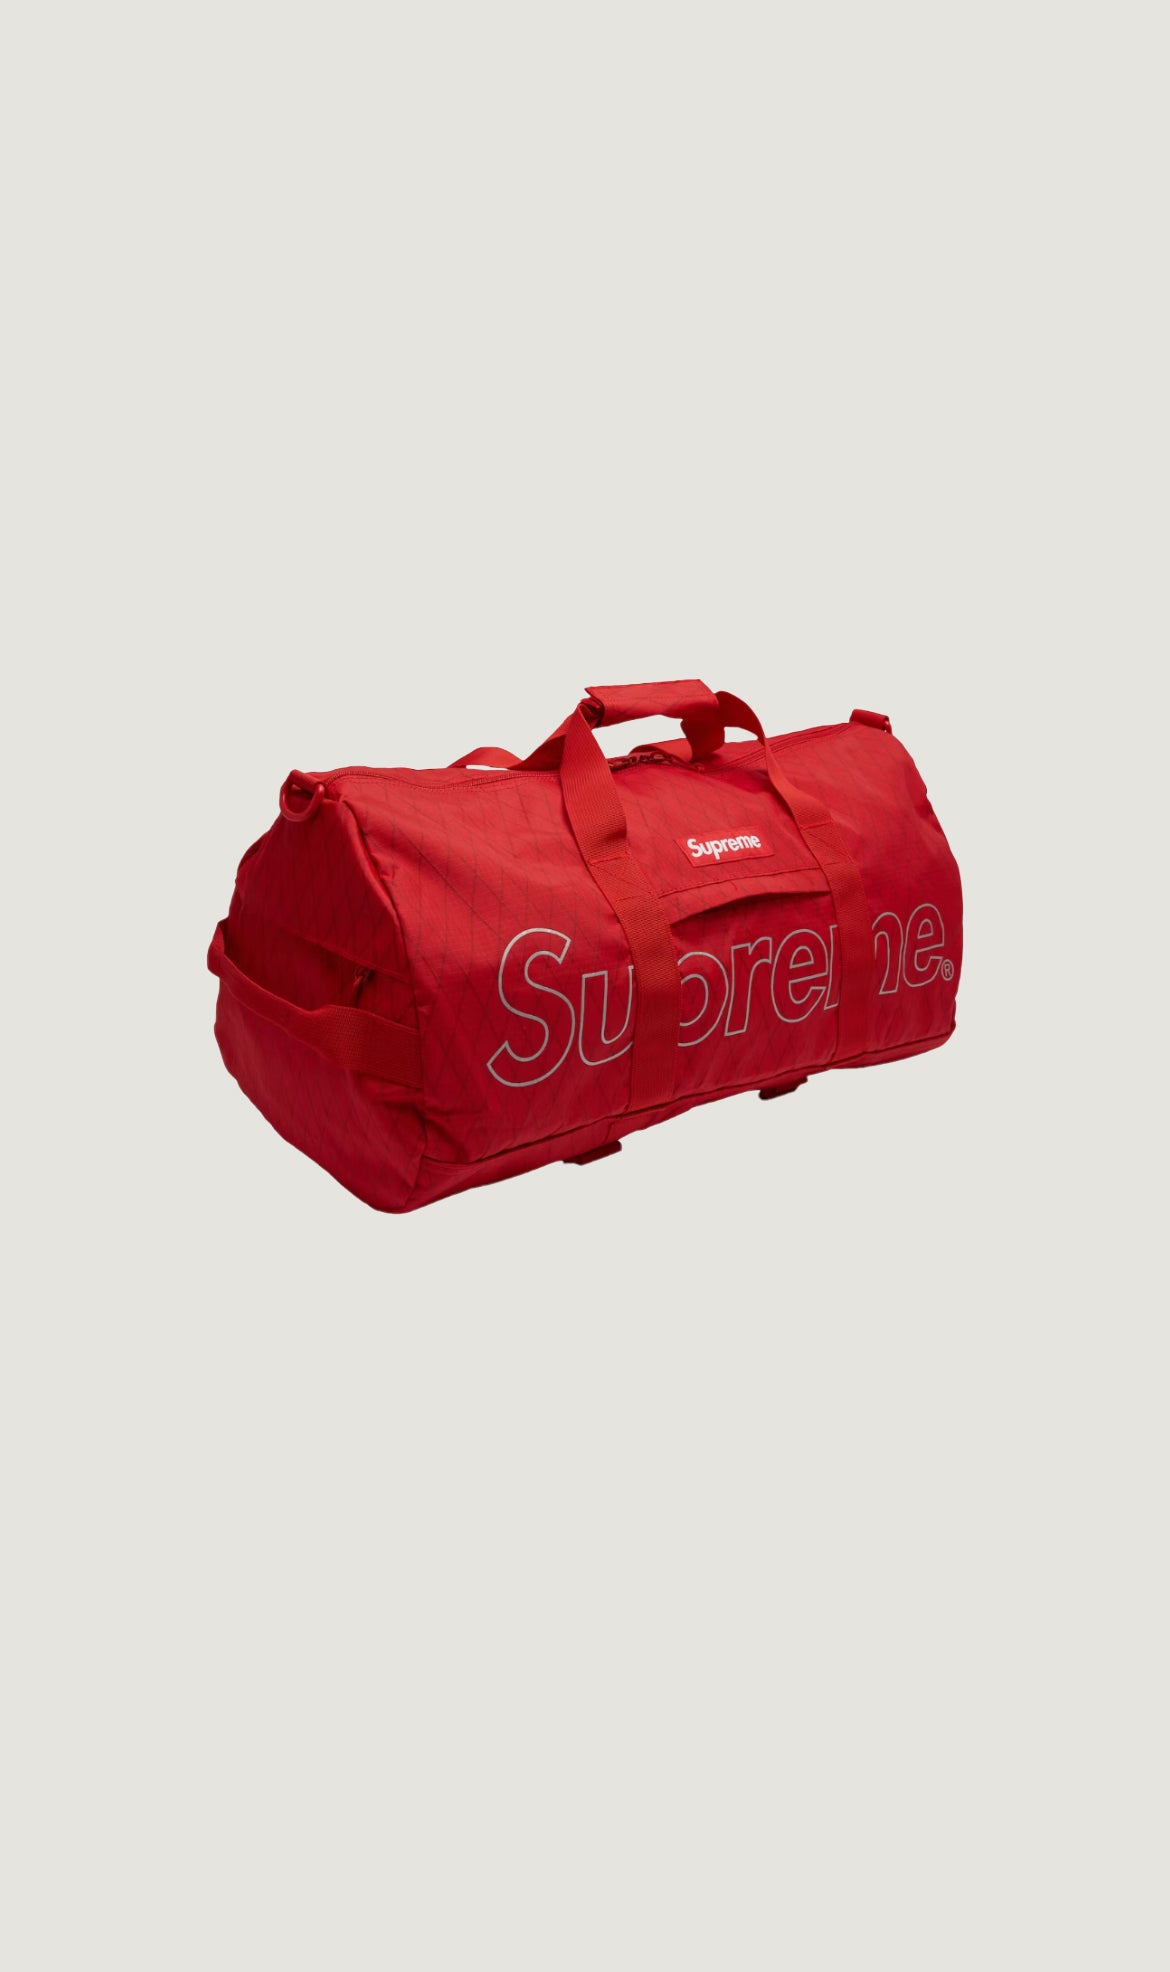 Load image into Gallery viewer, SUPREME DUFFLE BAG - RED
